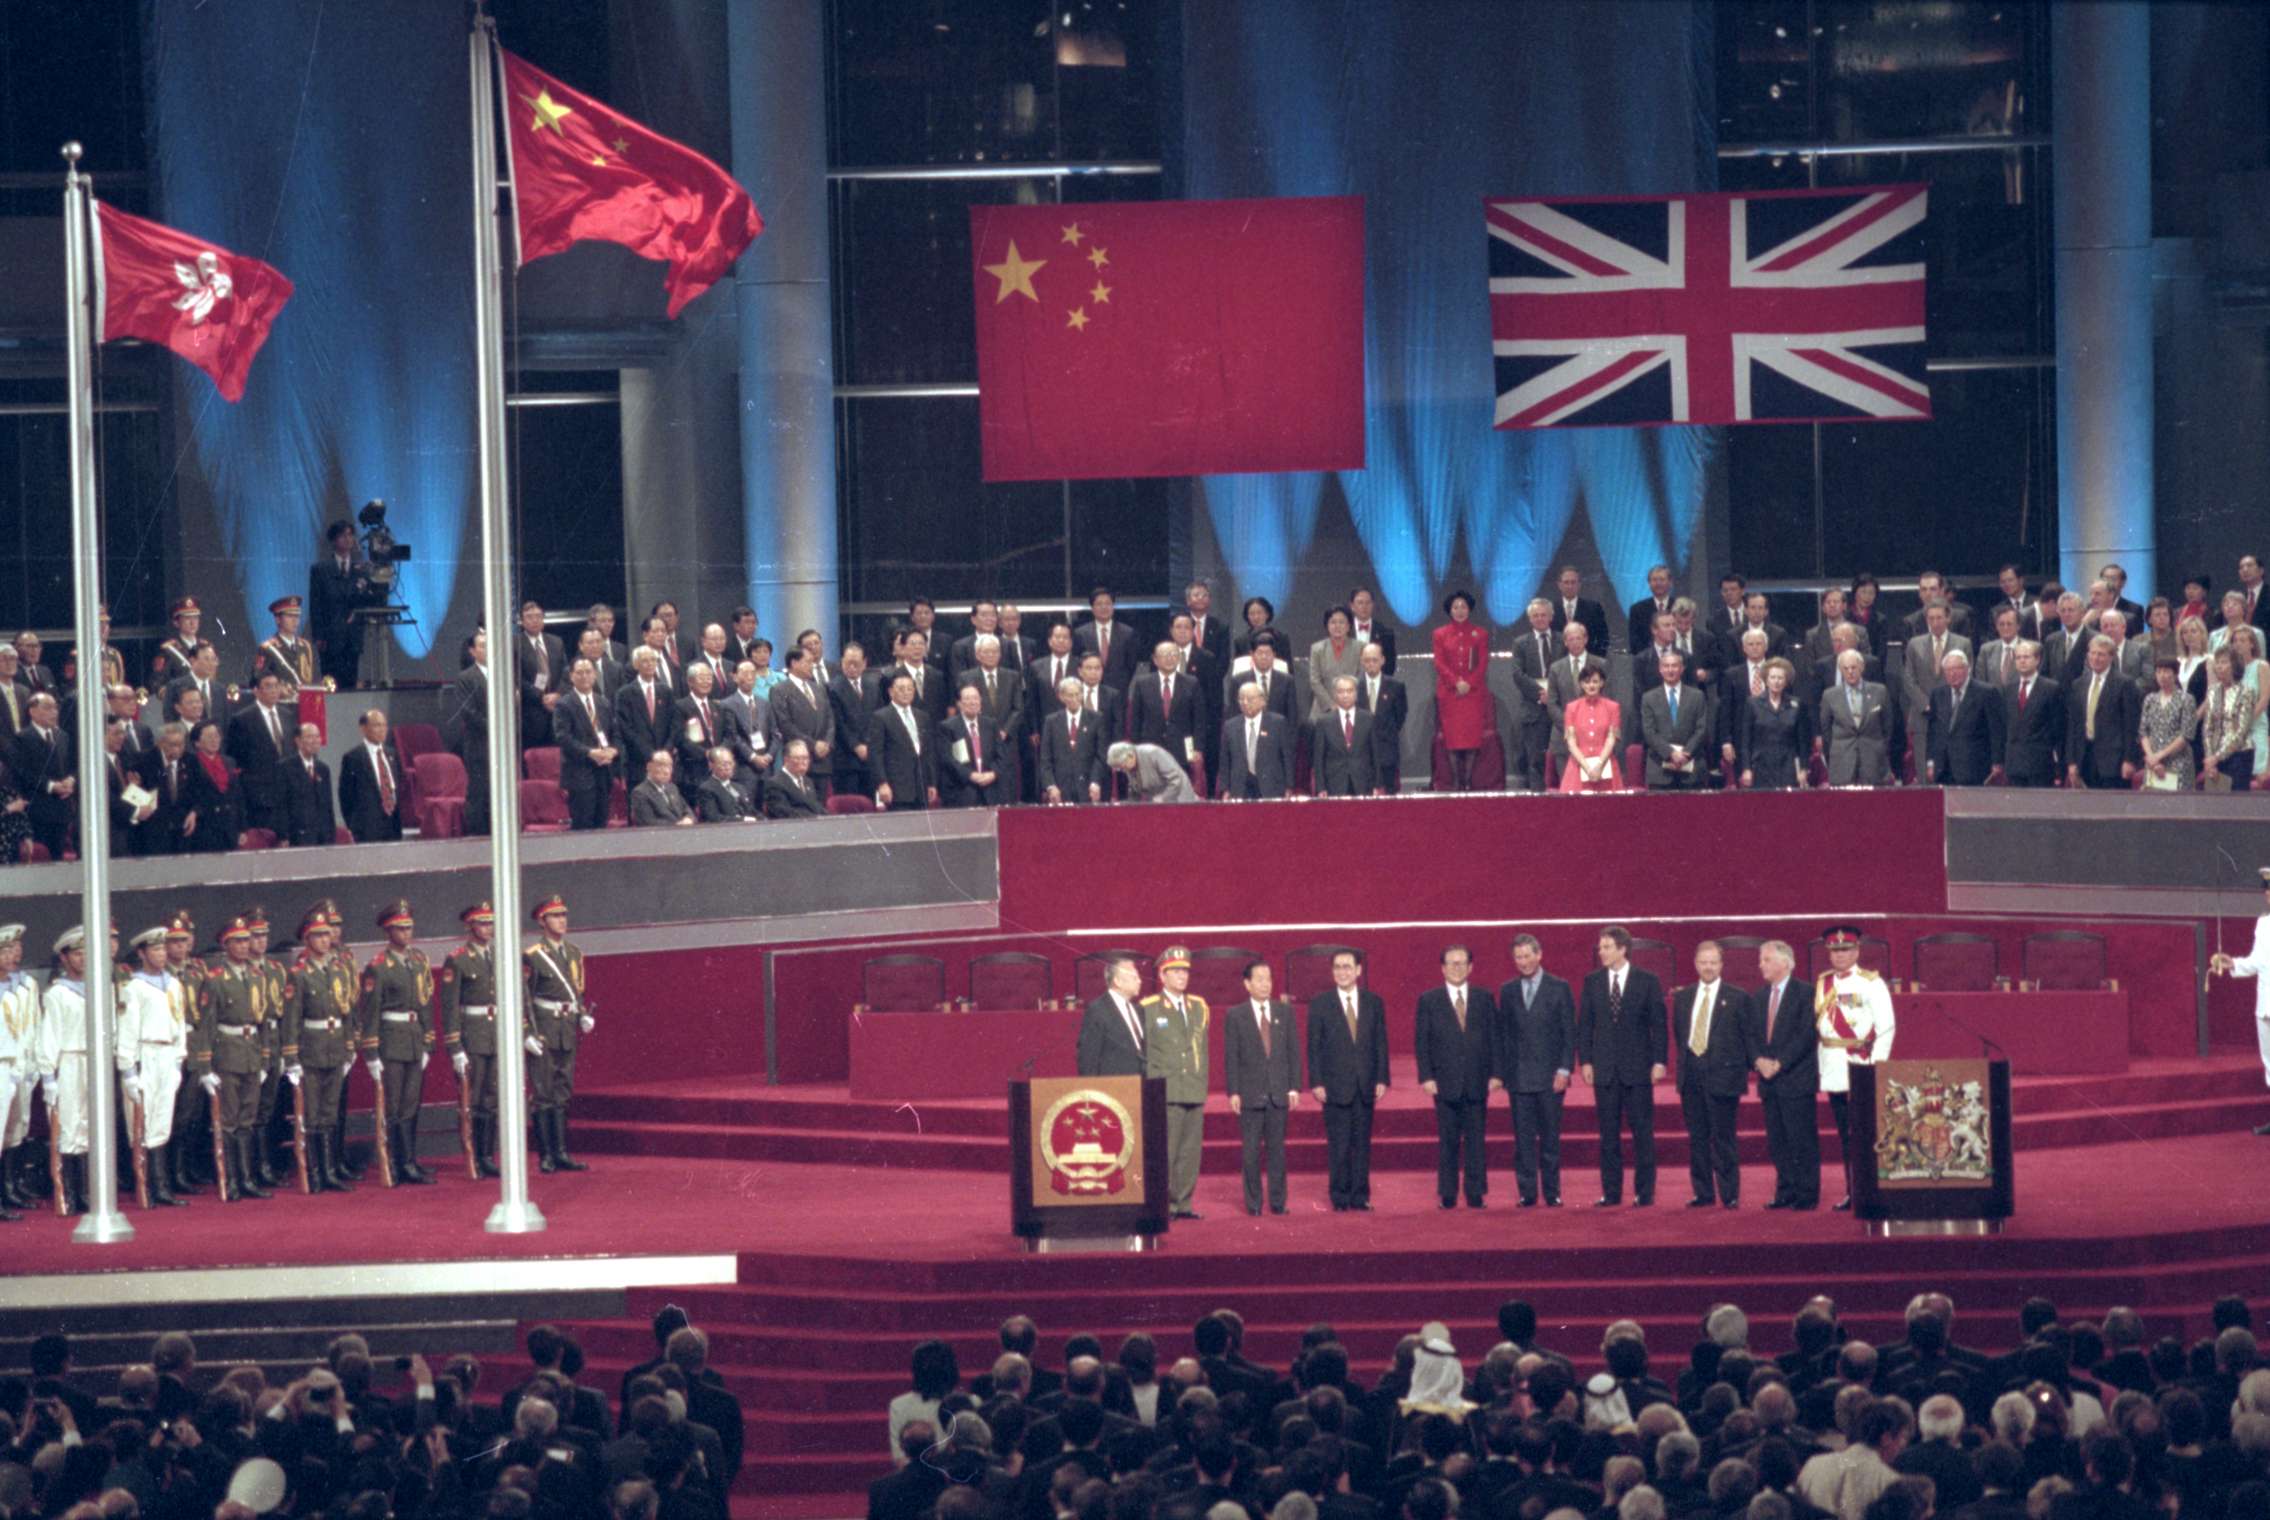 Hong Kong’s handover ceremony at the Convention and Exhibition Centre in Wan Chai. Photo: Robert Ng